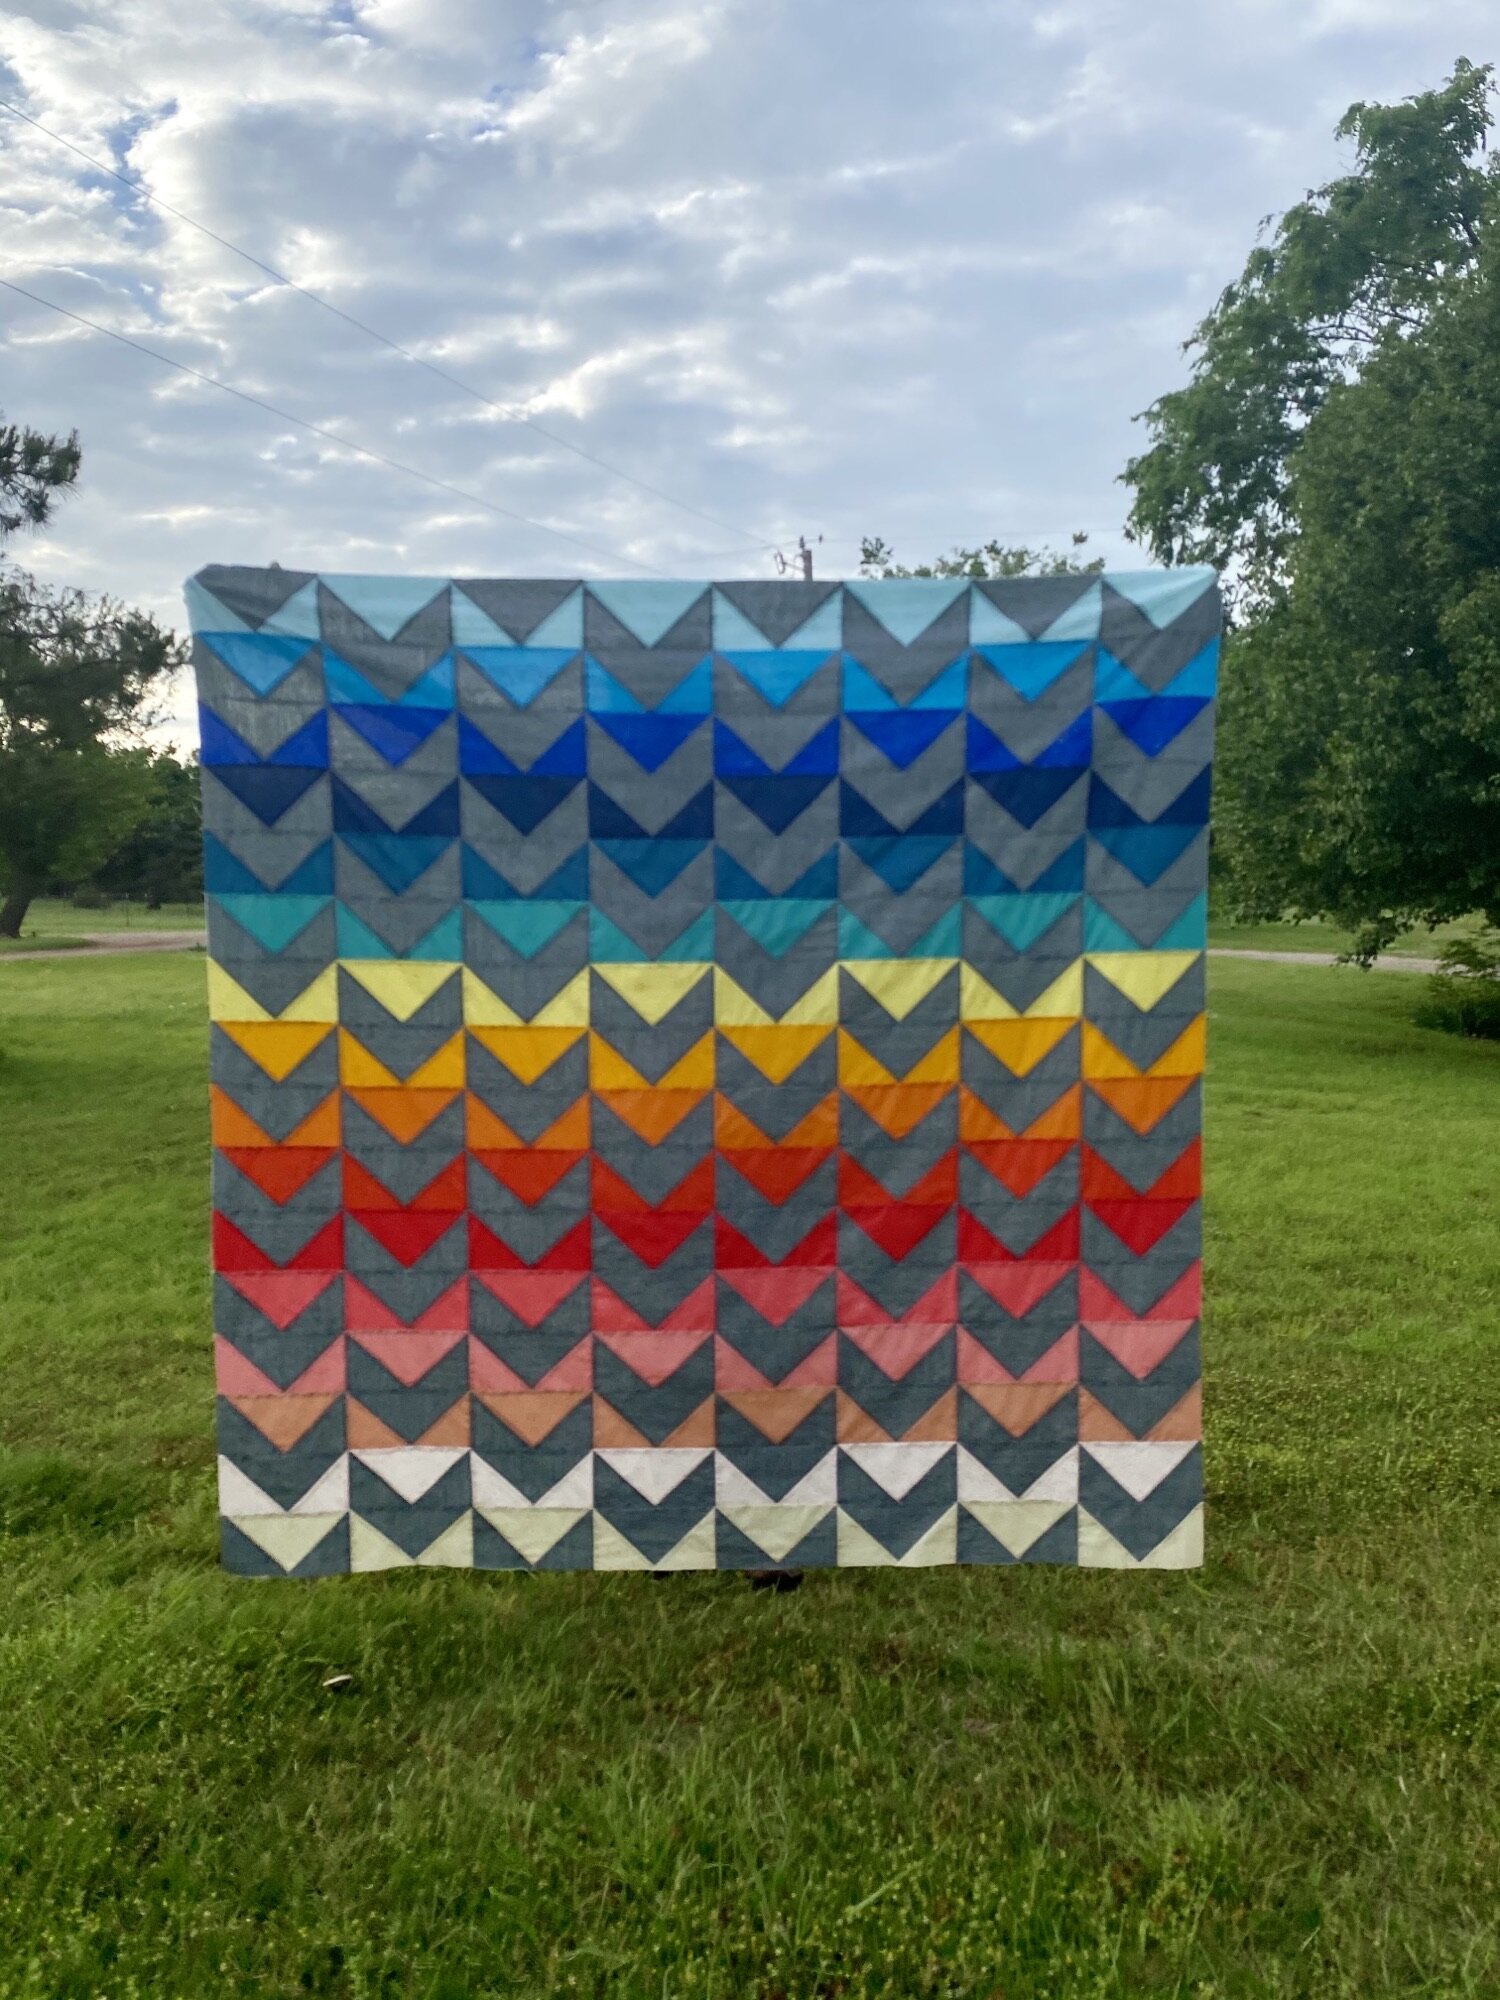 Abby included an extra flying geese block on each row making her quilt an extra snuggly size! I love the beautiful rainbow color transition in contrast with the grey background fabric. I can’t wait to see how she decides to finish this quilt! You can find Abby and her quilts on IG @abbygailroggenkamp.